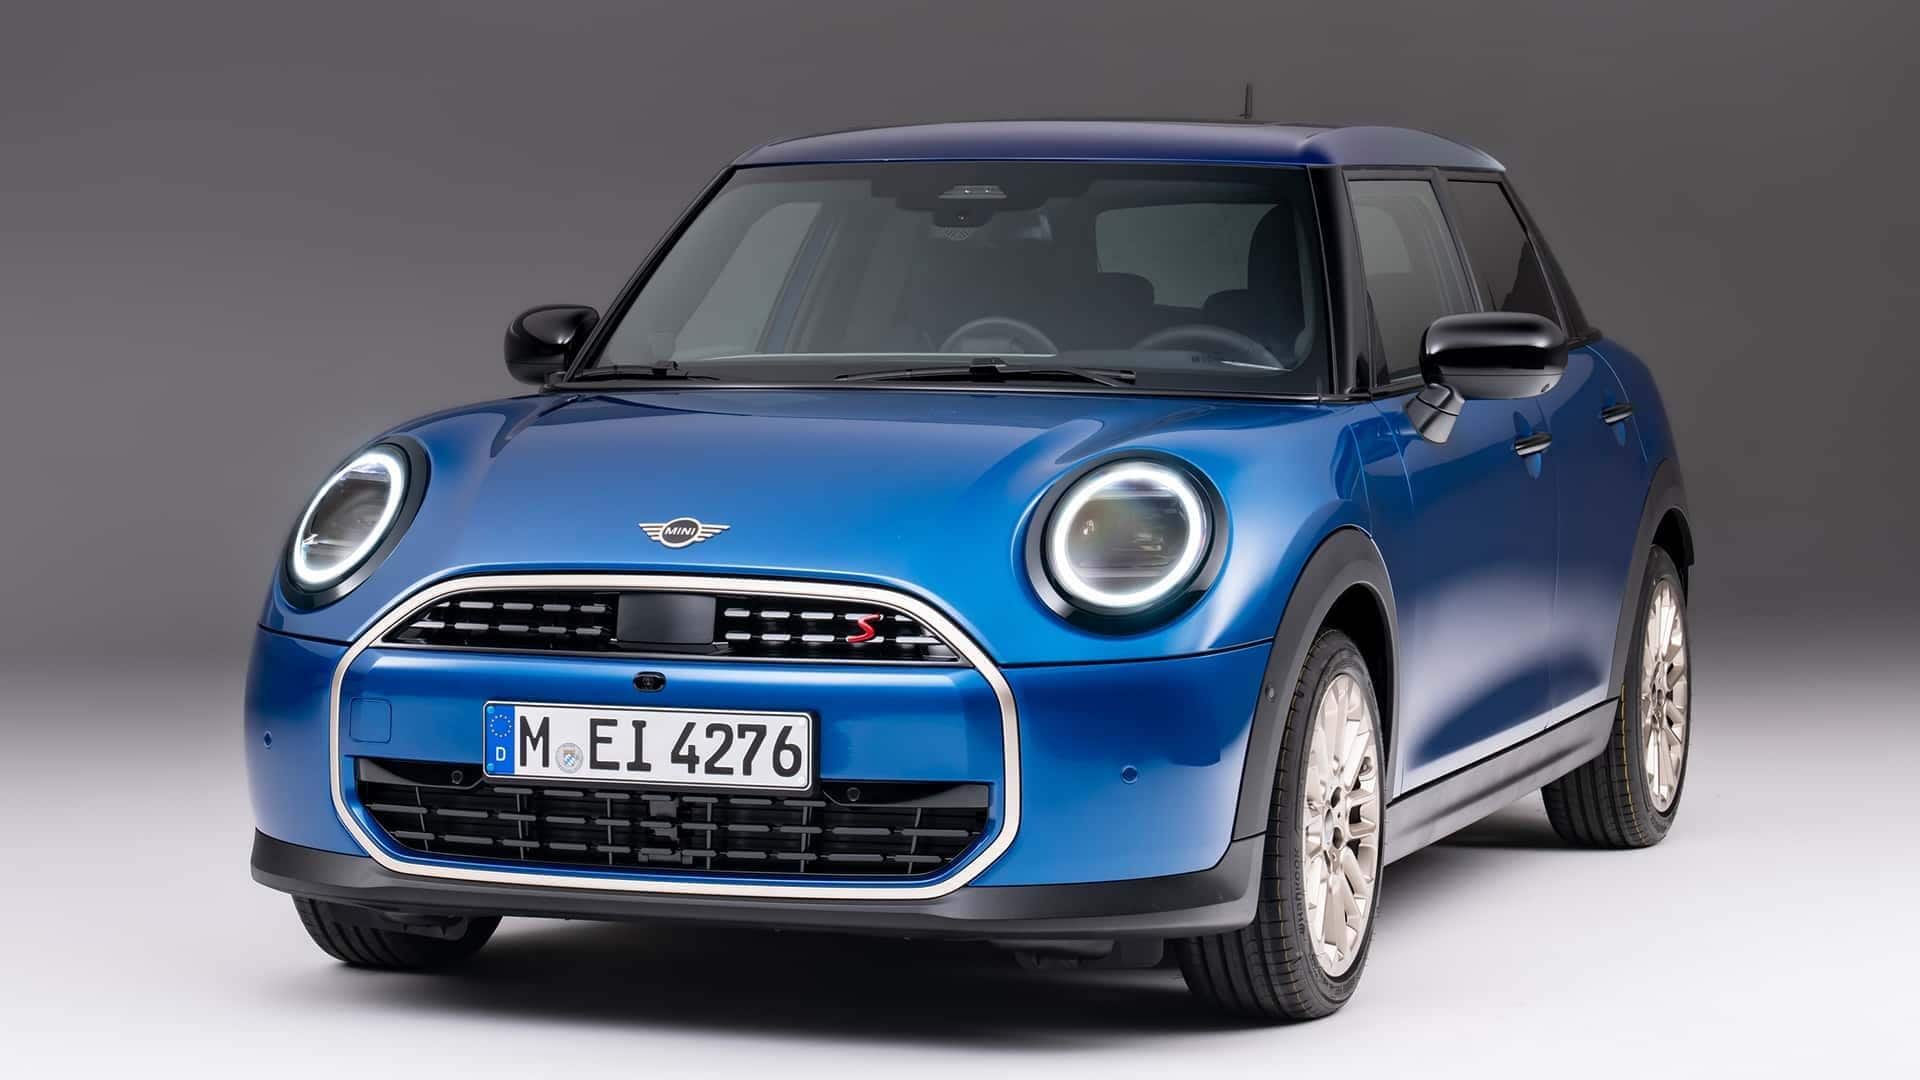 MINI Cooper 5-door, with more power and space, unveiled